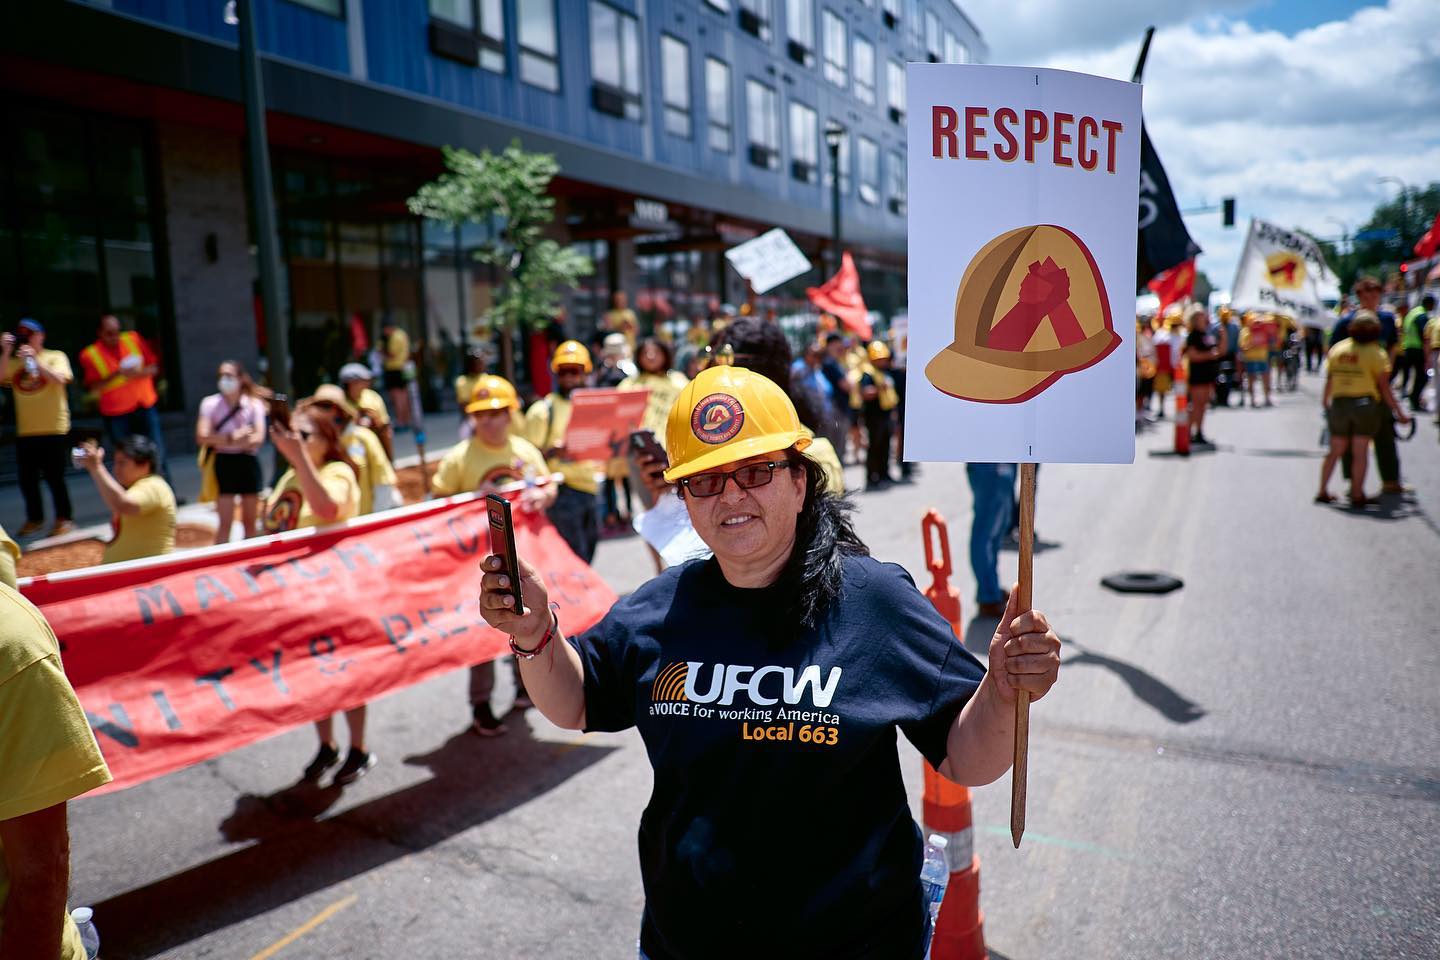 A worker in a construction hat at a BDR march